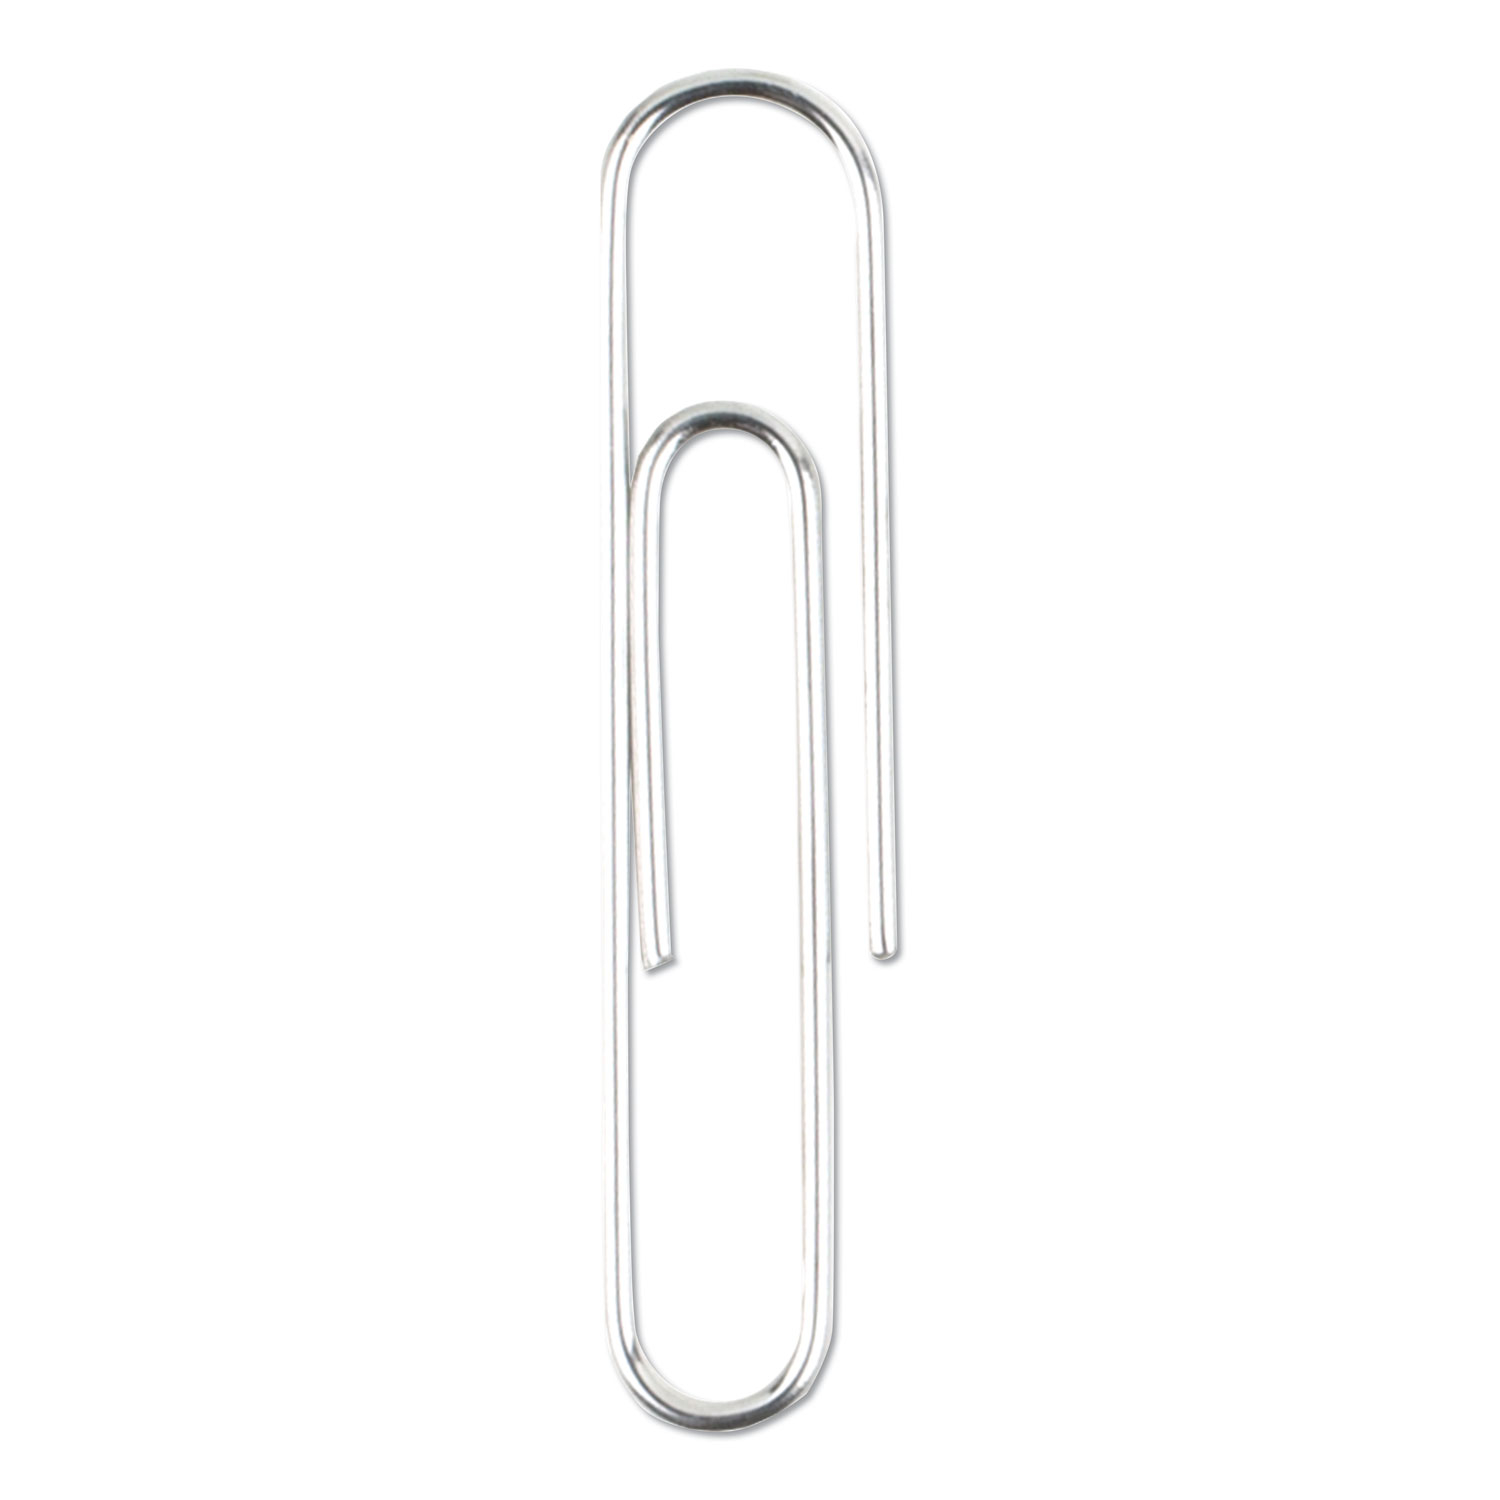 50 Count Shaped Paper Clips Silver Grocery Shopping Cart Desk Office Supplies 